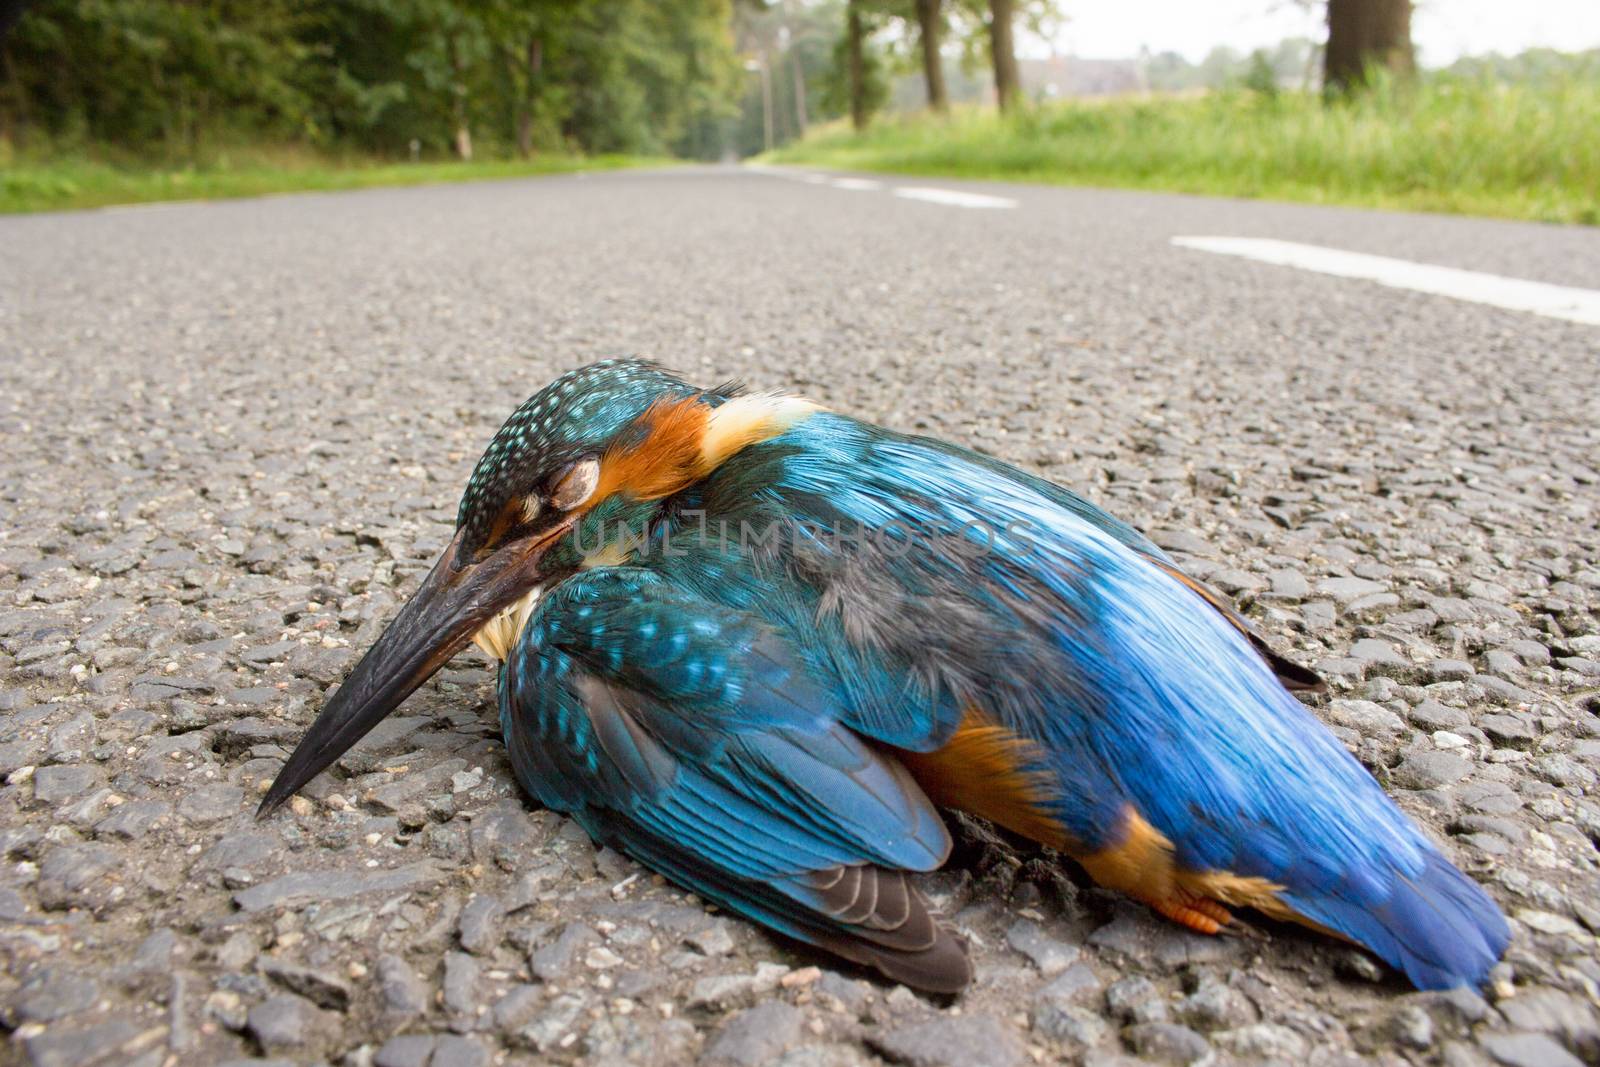 Kingfisher hit by  car lying on the road in rural area